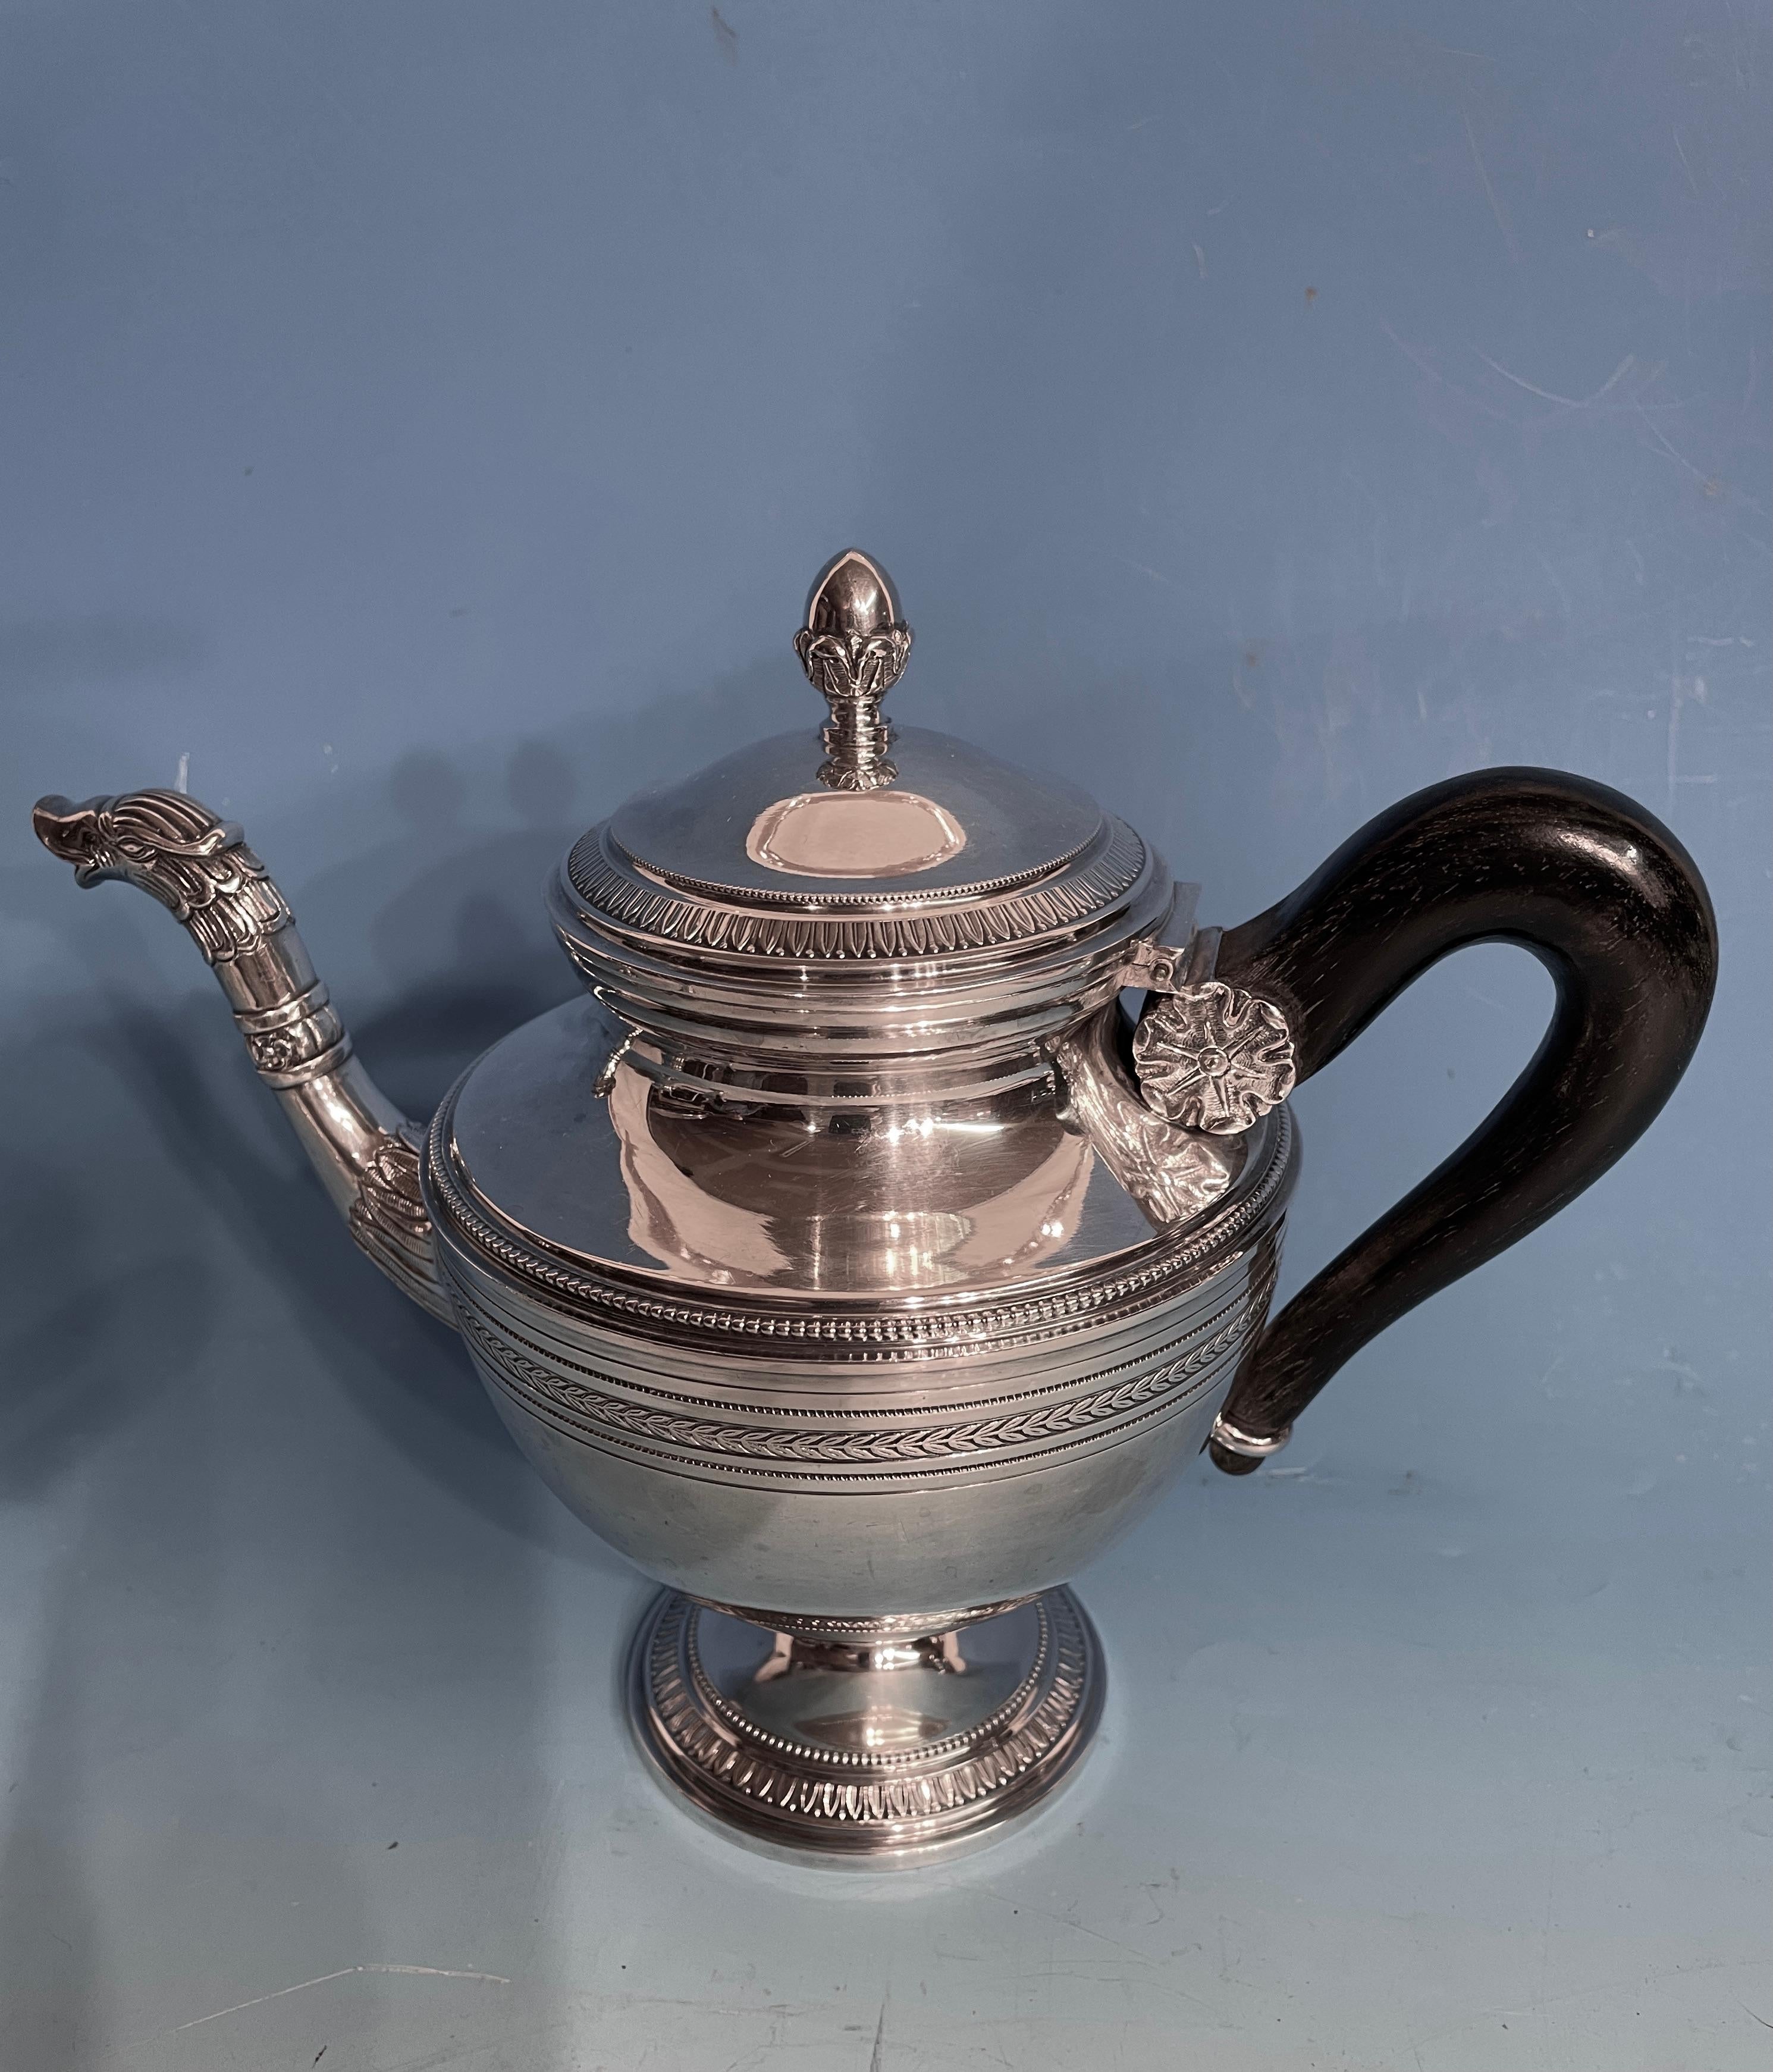 This beautiful silver coffee and tea set is made around 1900 in Belgium. The design is inspired by 18th century Neoclassical style, the individual elements create a unique touch. 
Pay attention to the beautiful details of this set. The spouts of